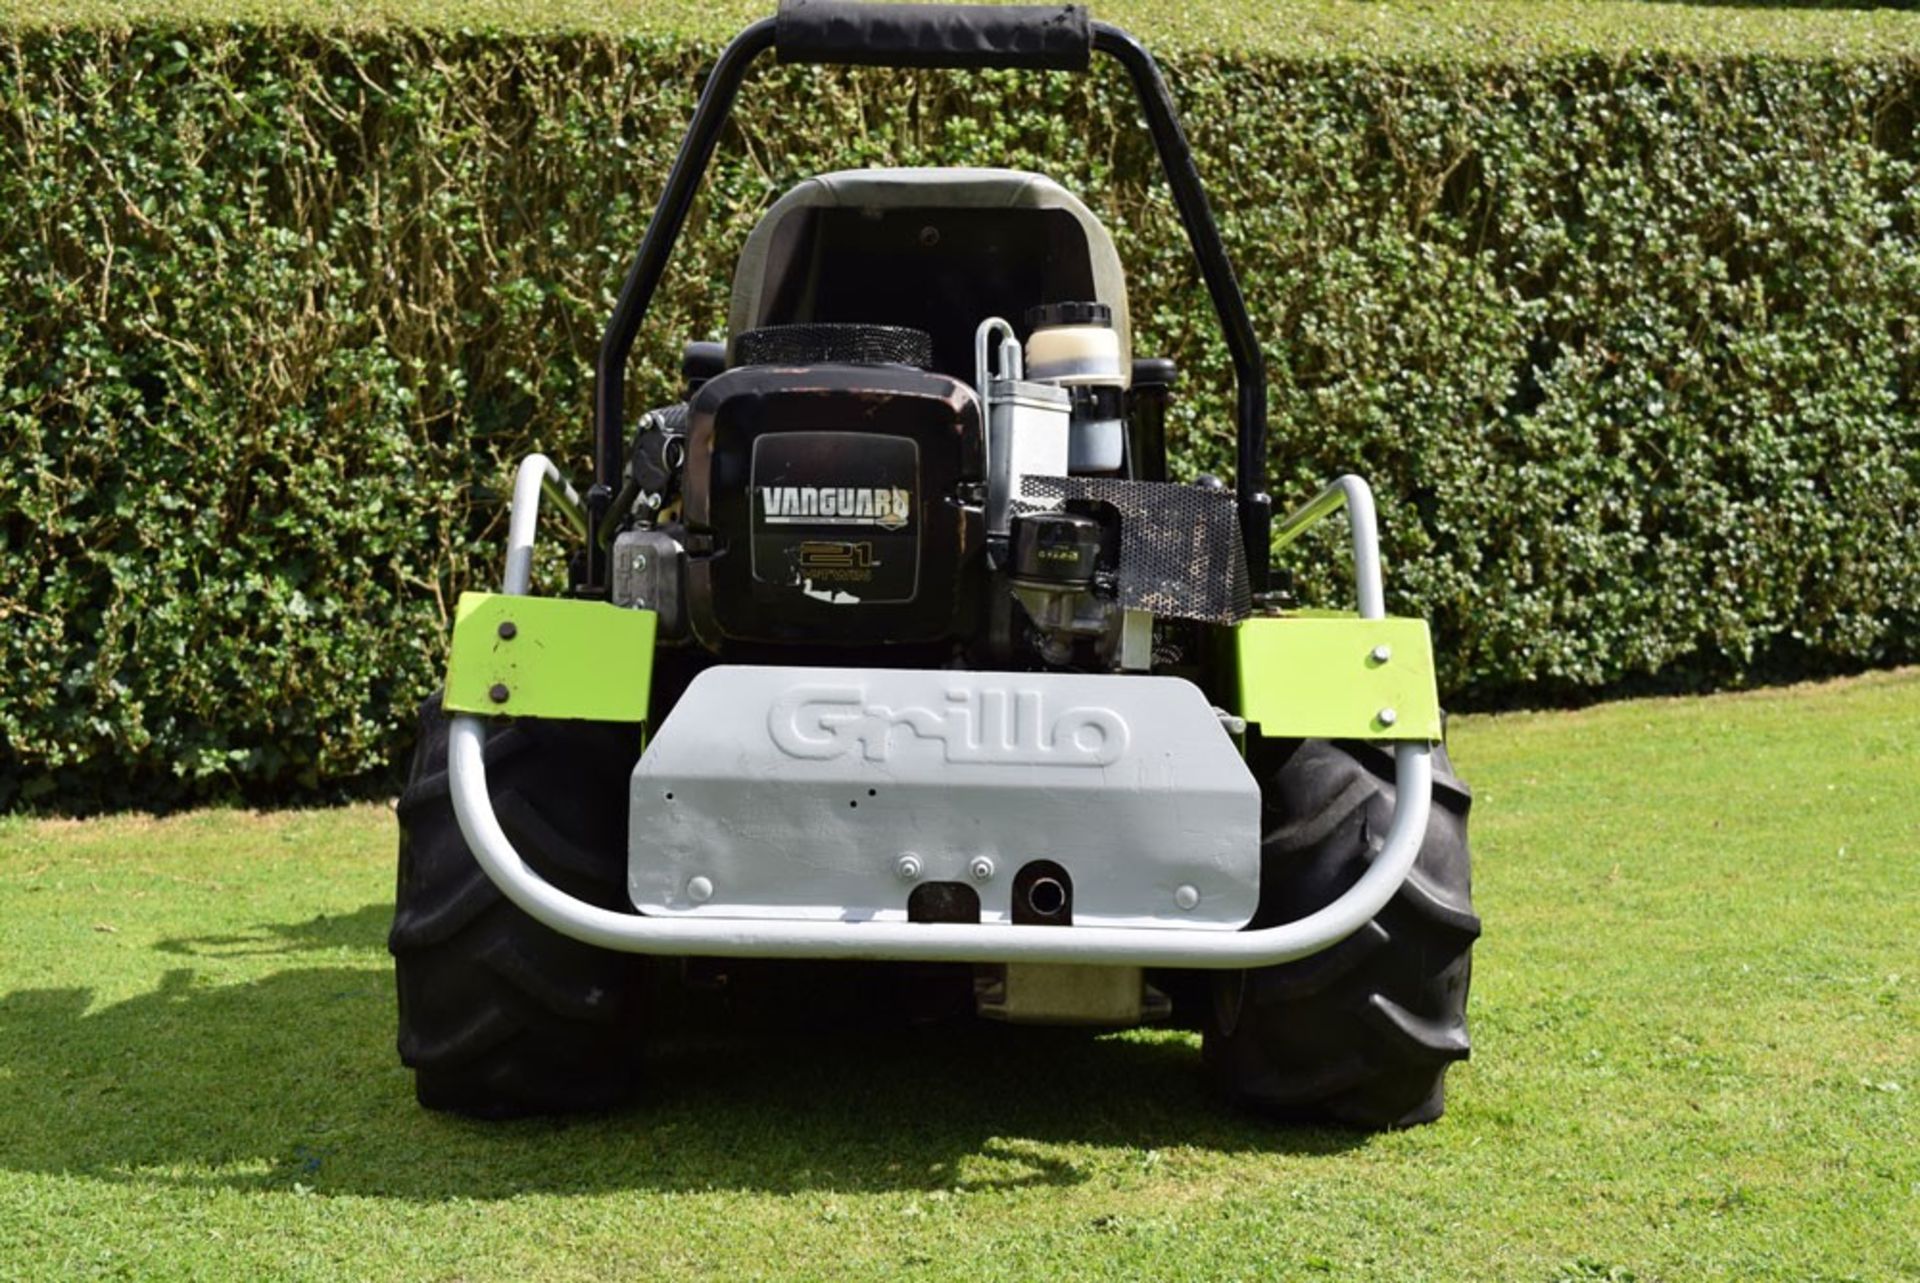 2011 Grillo Climber 9.21 Ride On Rotary Mower - Image 7 of 9